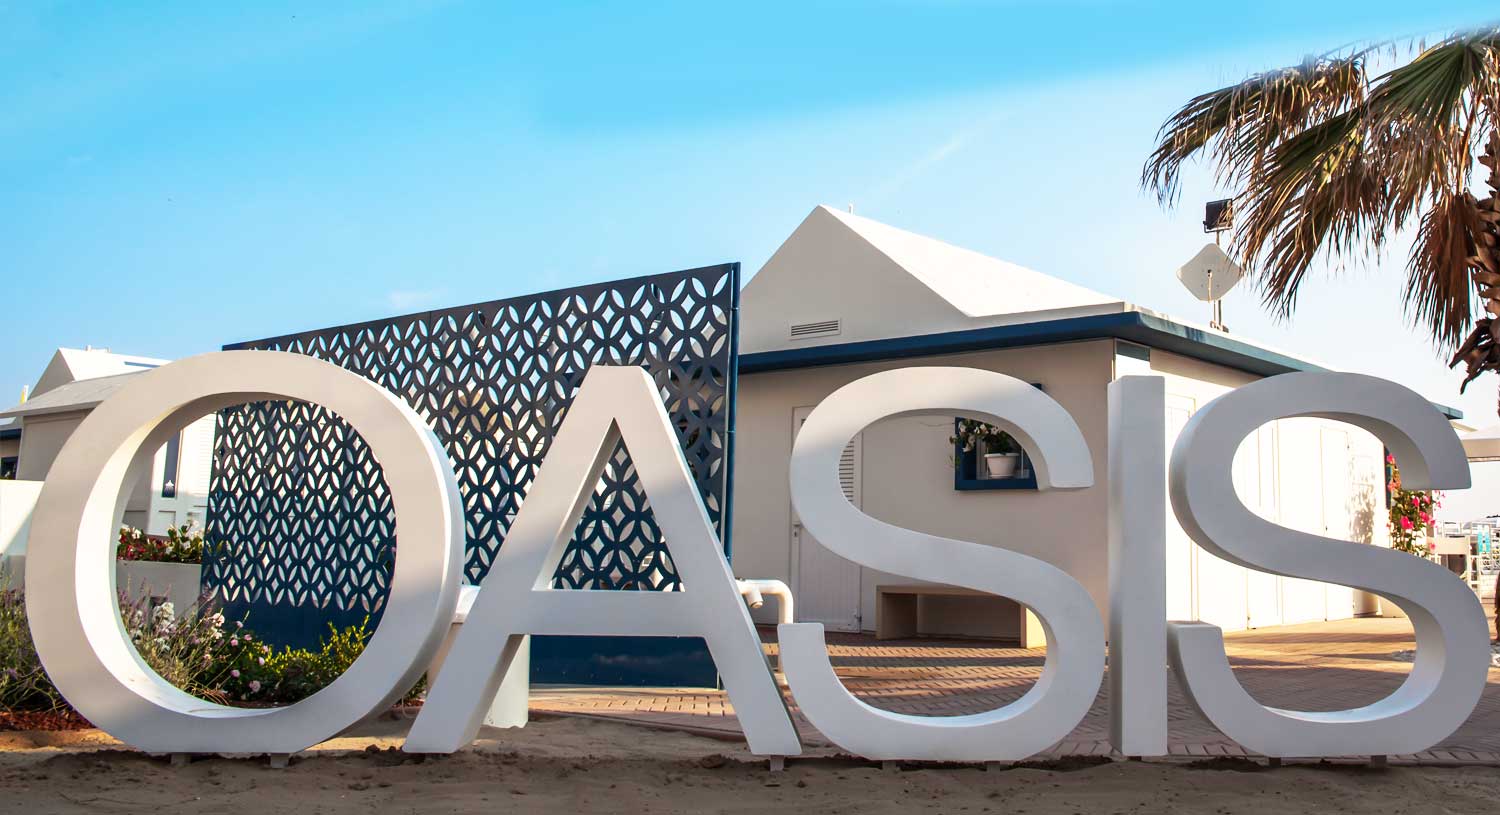 Questions about Oasis Cattolica